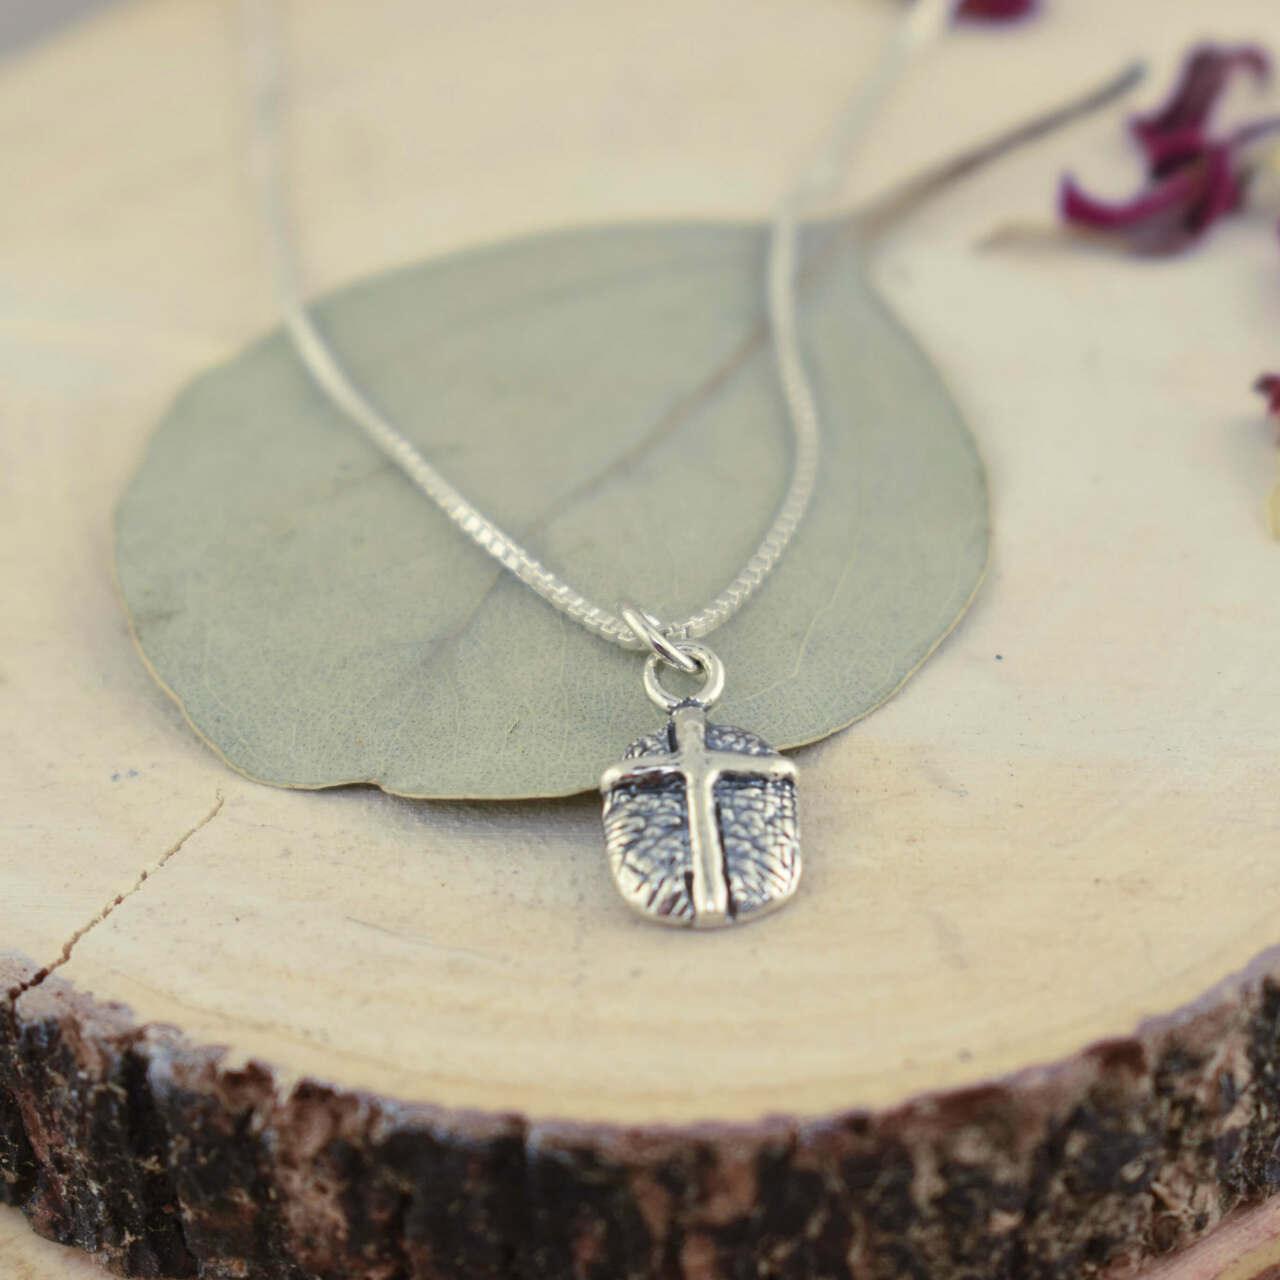 Handcrafted sterling silver cross necklace on a 16-inch chain